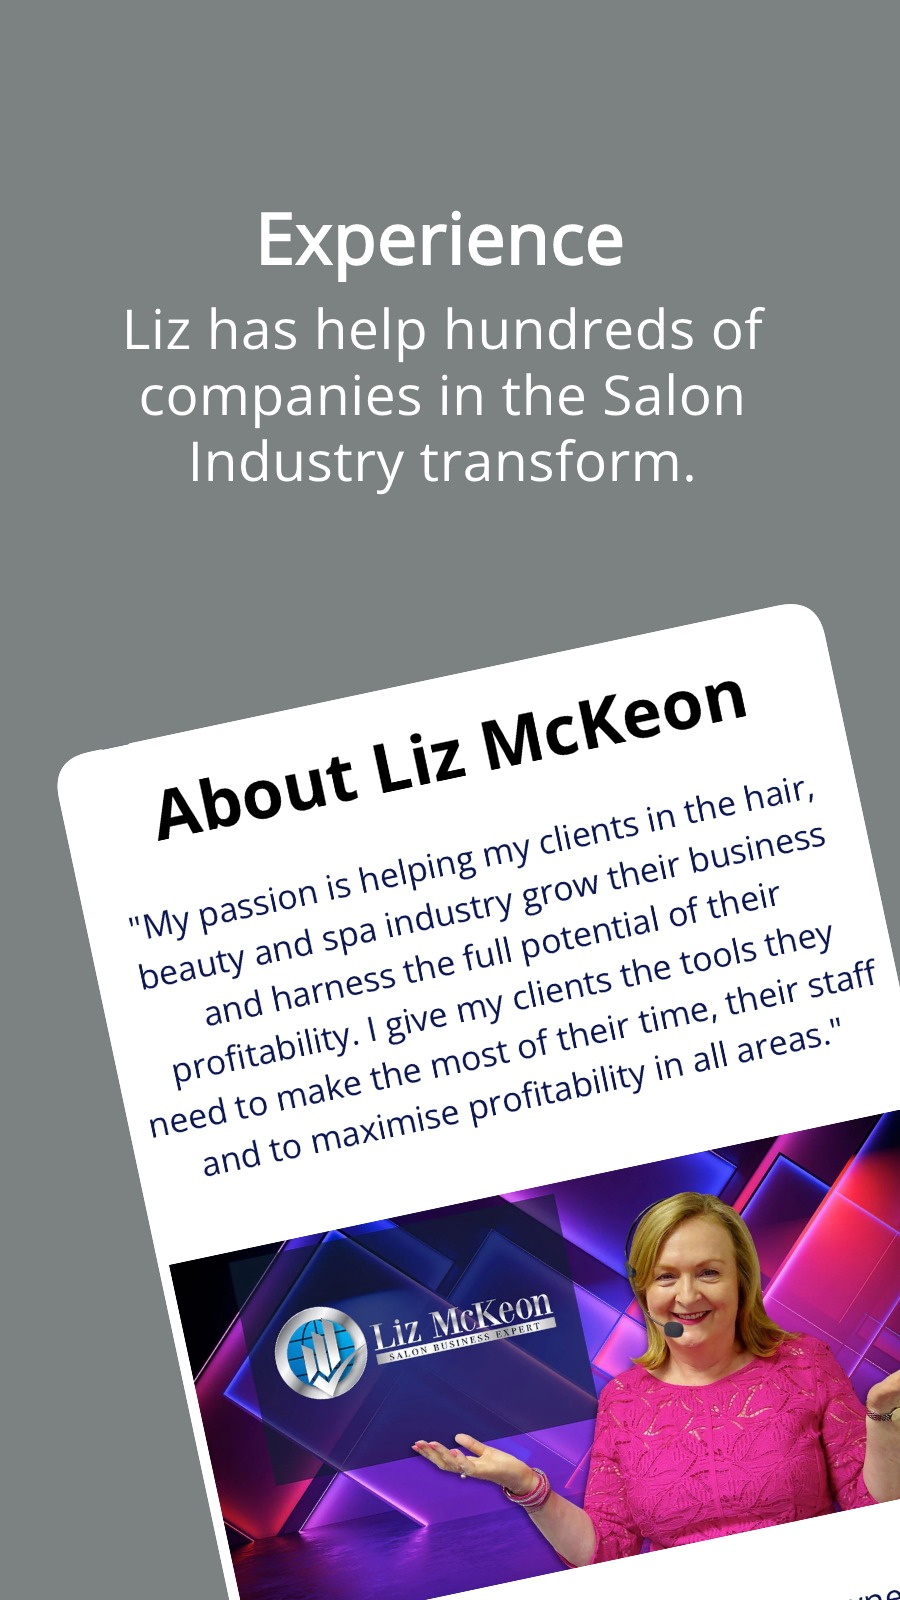 Experience - Liz has help hundreds of companies in the Salon Industry transform.